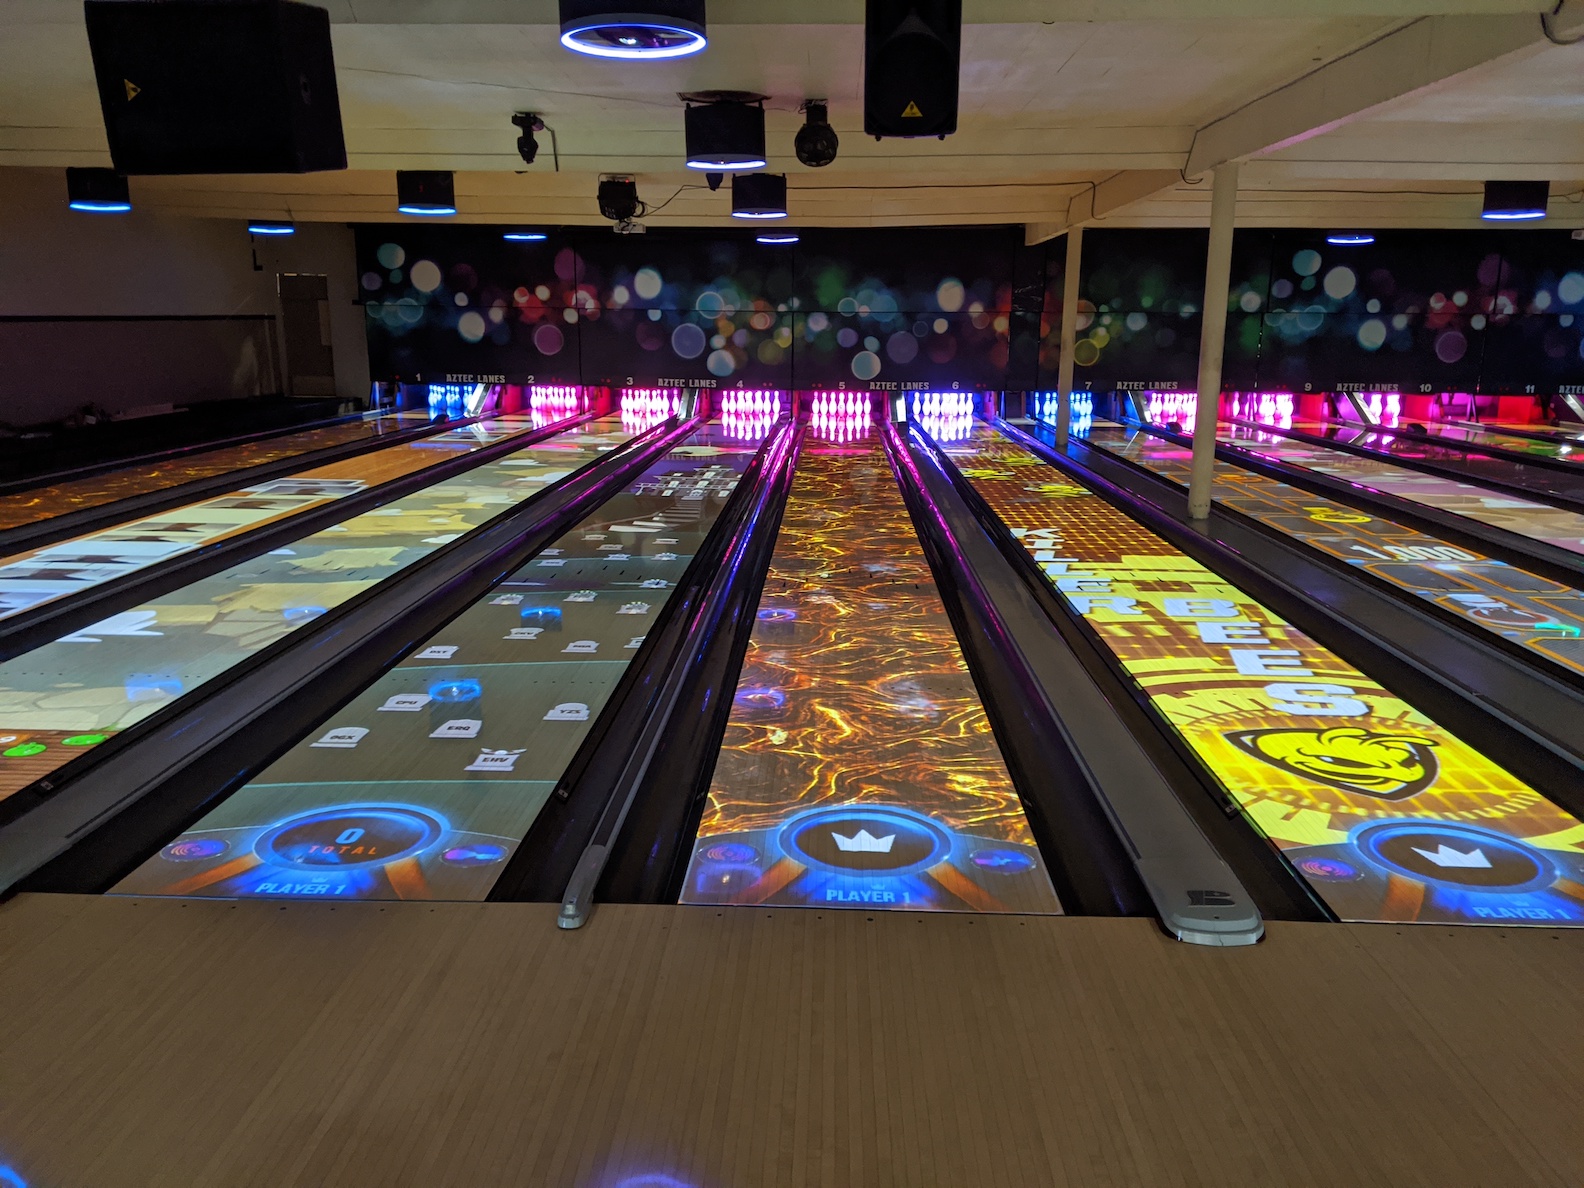 Let the Good Times Roll at Aztec Lanes Bowling Alley in Olympia